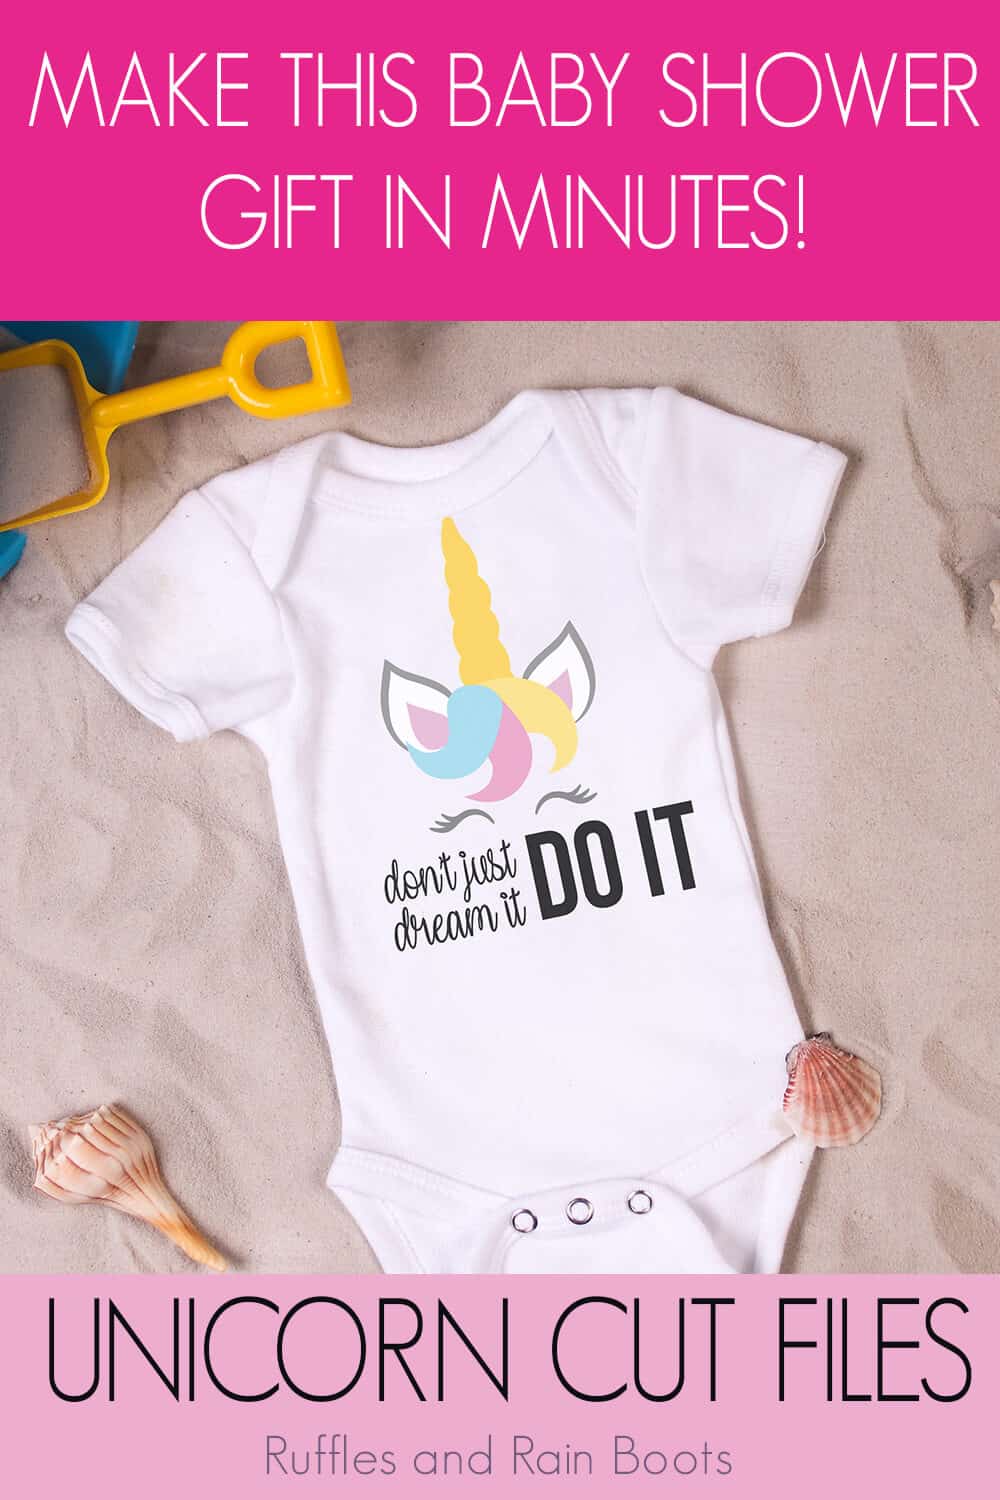 Don't Just Dream It Do It free unicorn cut file on baby onesie with text which reads make this baby shower gift in minutes unicorn cut files